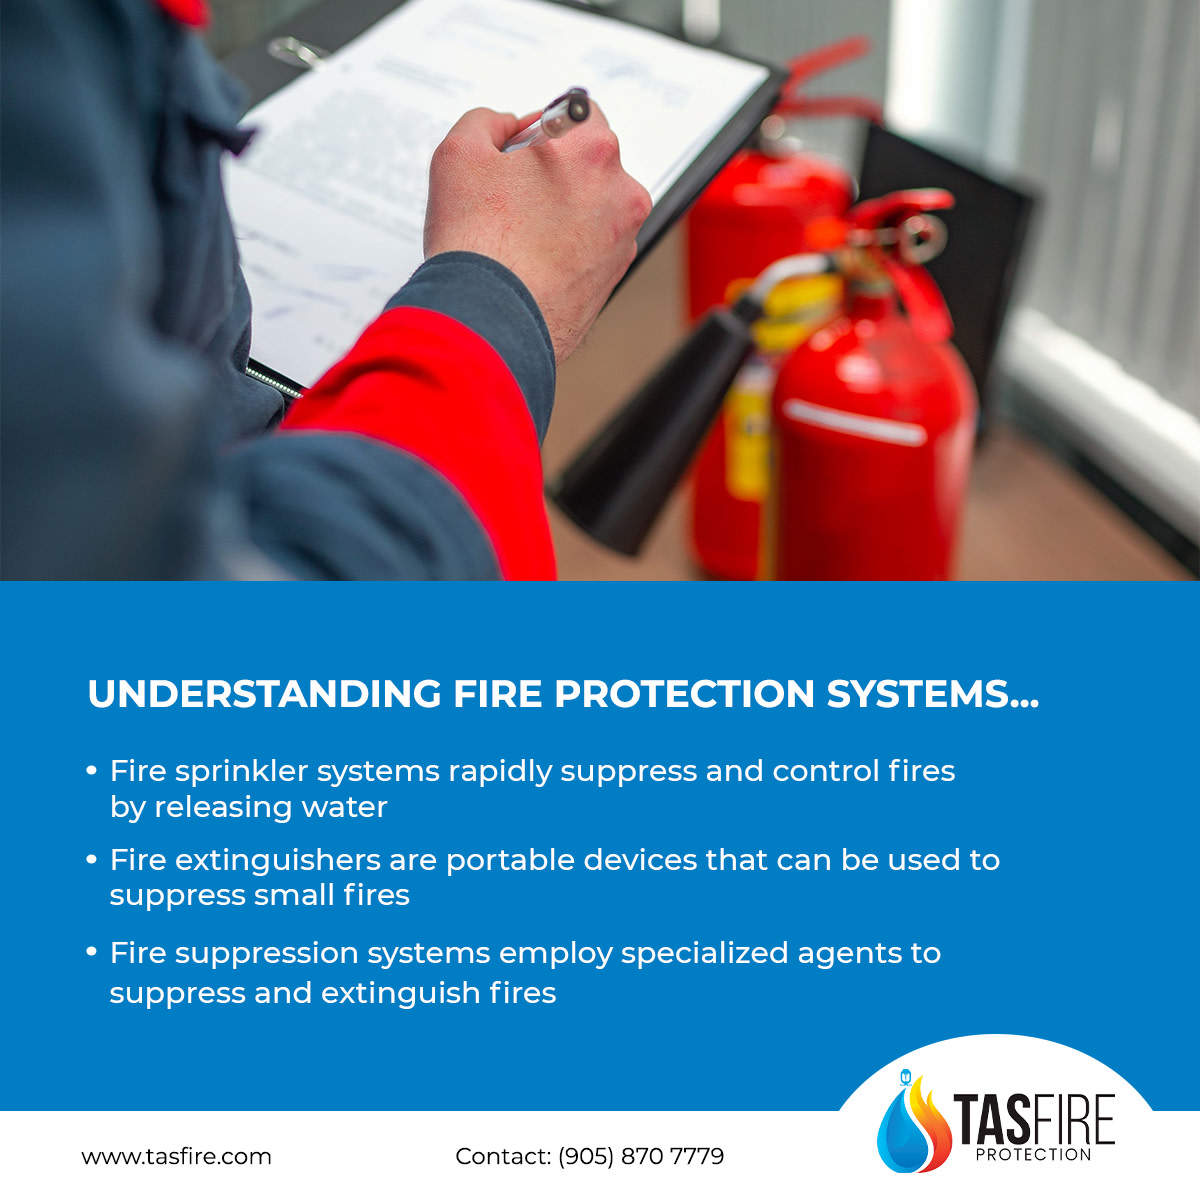 Understanding Fire Protection Systems...
LEARN MORE... tasfire.com/the-importance…

#fireprotection #fireservices #fireprotectionservices #firesuppression #firealarms #sprinklersystems #fireextinguishers #smokedetection #securitysystems #firehydrants #weston #florida #southflorida